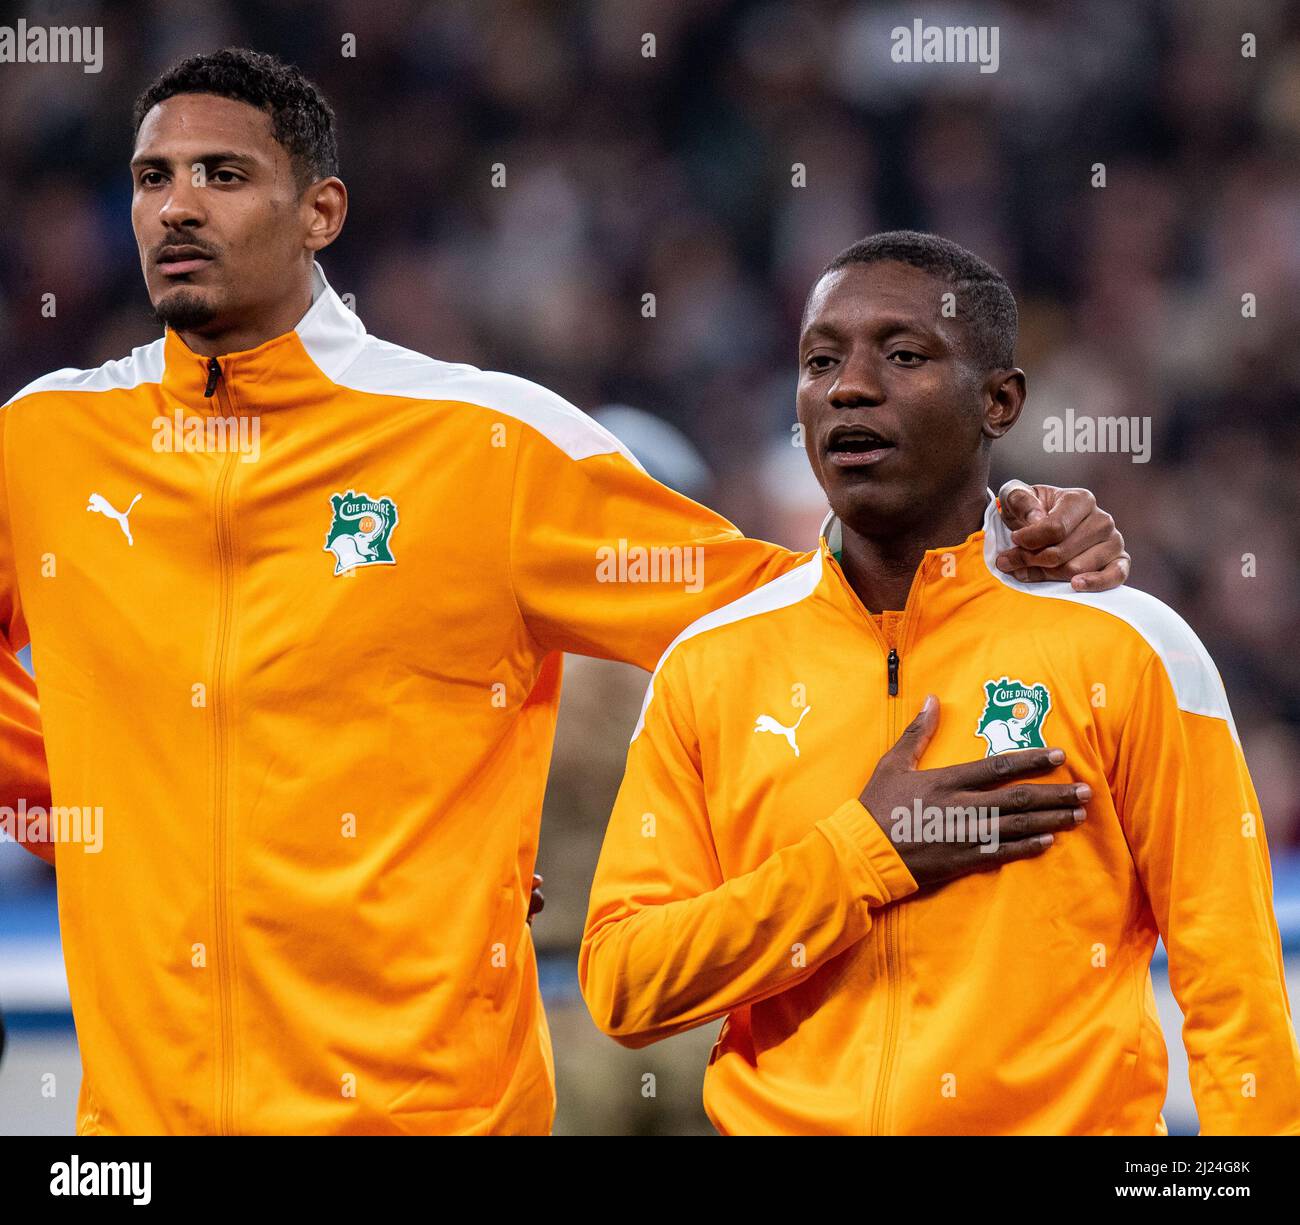 LONDON, ENGLAND - MARCH 29: Sebastien Haller, Max Gradel of Ivory Coast during the International Friendly match between England and Ivory Coast at Wembley Stadium on March 29, 2022 in London, England. (Photo by Sebastian Frej) Credit: Sebo47/Alamy Live News Stock Photo